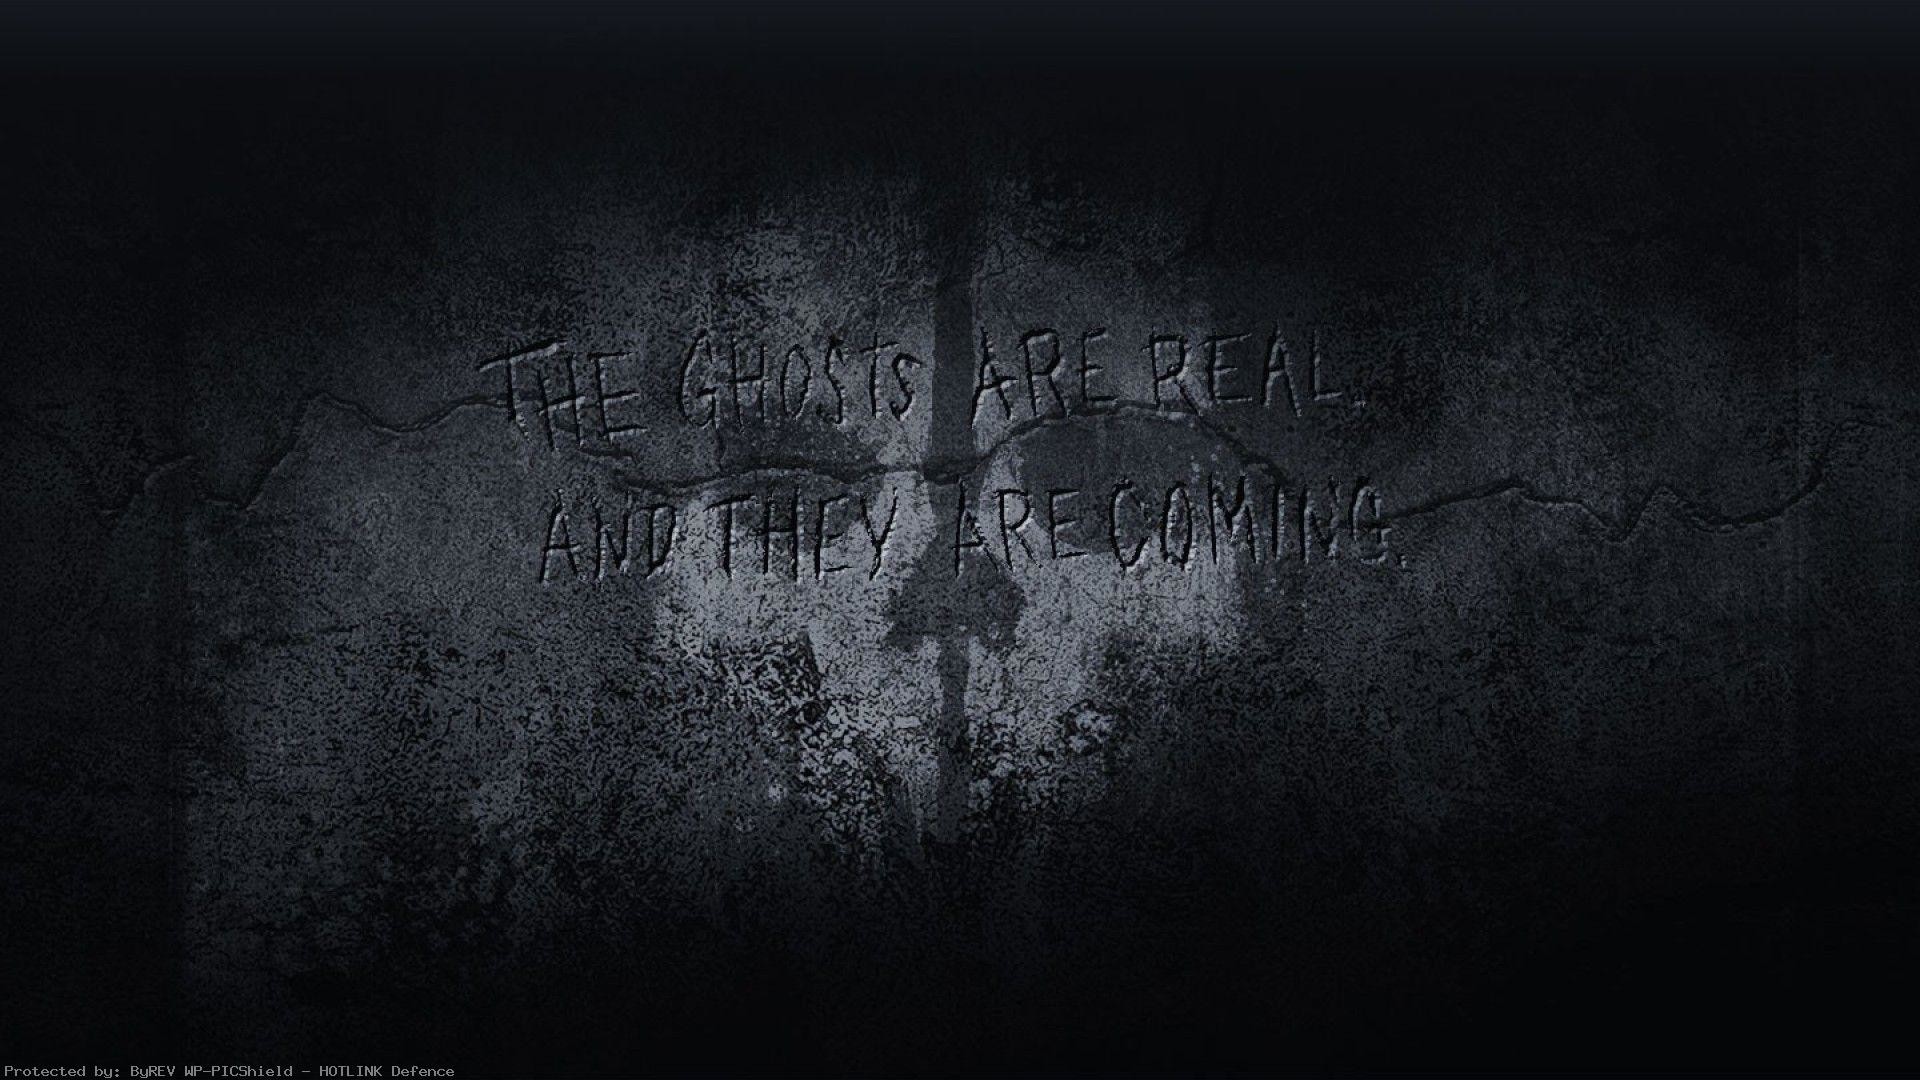 Call of duty ghosts wallpaper – live wallpaper HD Desktop Wallpapers. Call Of Duty Ghosts Wallpaper Live Wallpaper HD Desktop Wallpapers